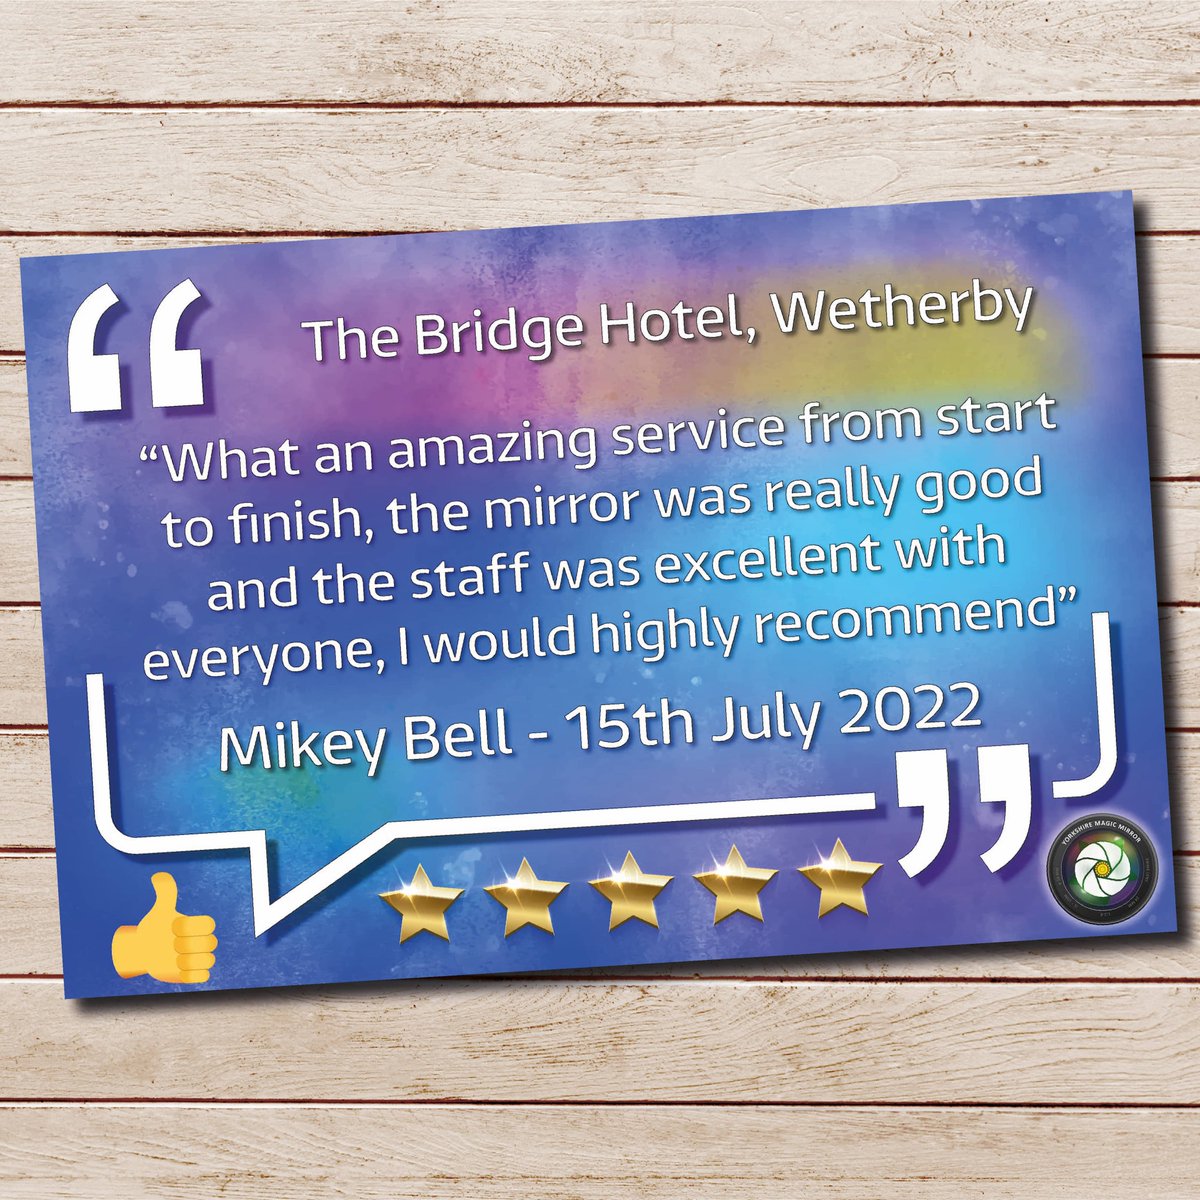 Thanks for the great review Mikey, the photos prove it was a brilliant night at @Bridge_Wetherby .⁣ .⁣ .⁣ .⁣ .⁣ #websitereview #websites #websitesthatconvert #websitetips #weddingvenuereview #weloveourclients #welovereviews #youropinion #youropiniondoesntmatter #yourstory